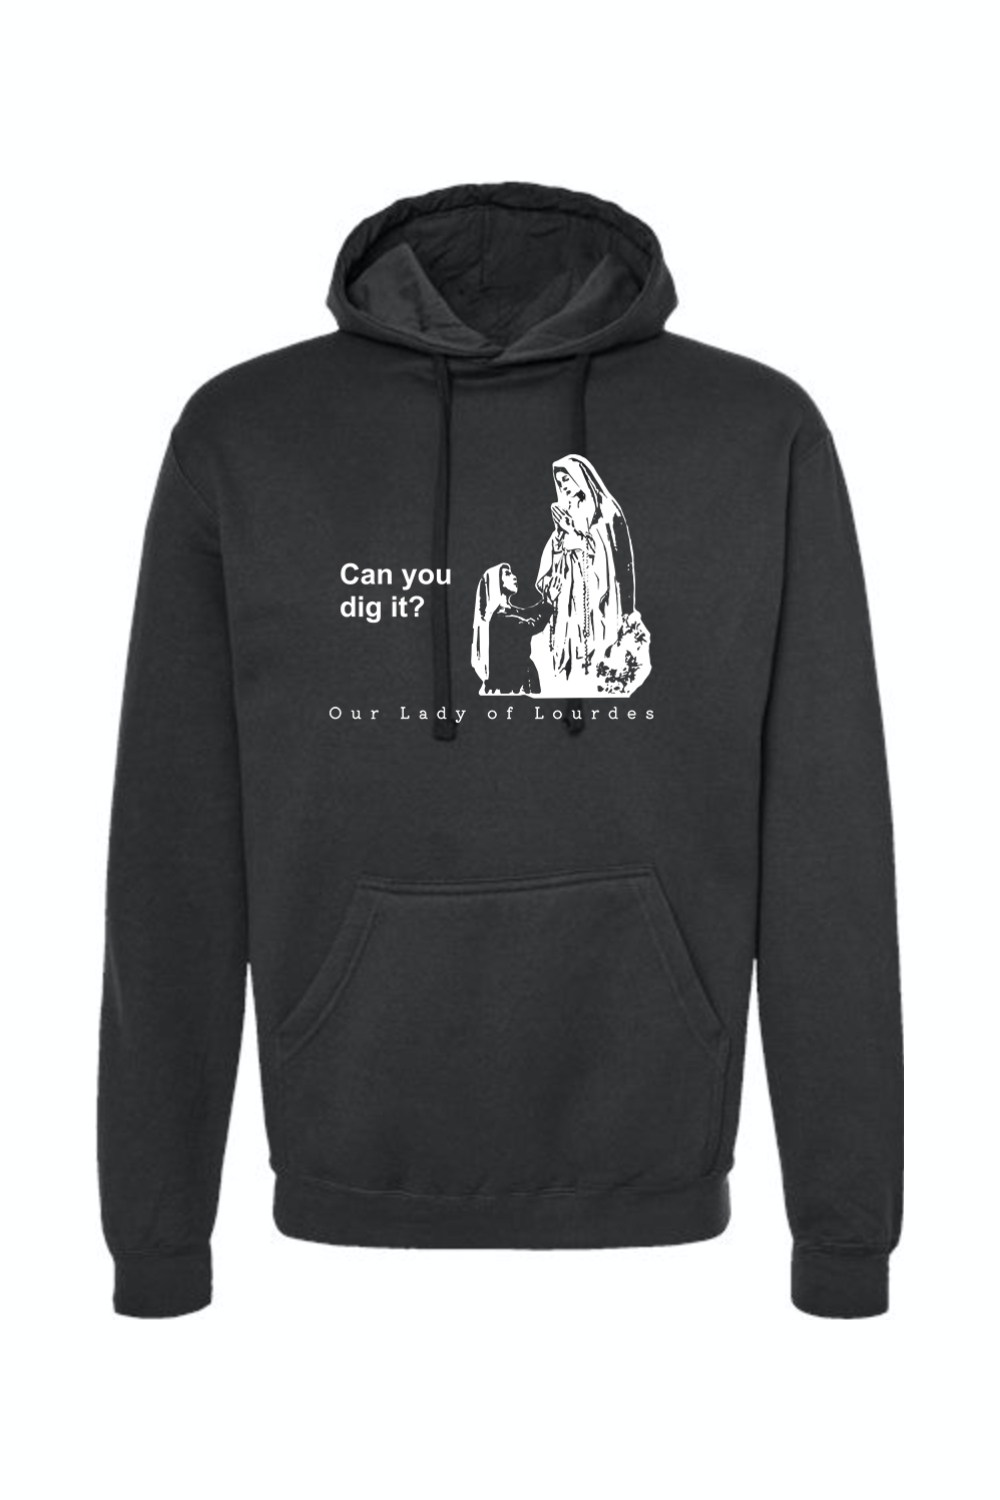 Can you dig it?- Our Lady of Lourdes Hoodie Sweatshirt